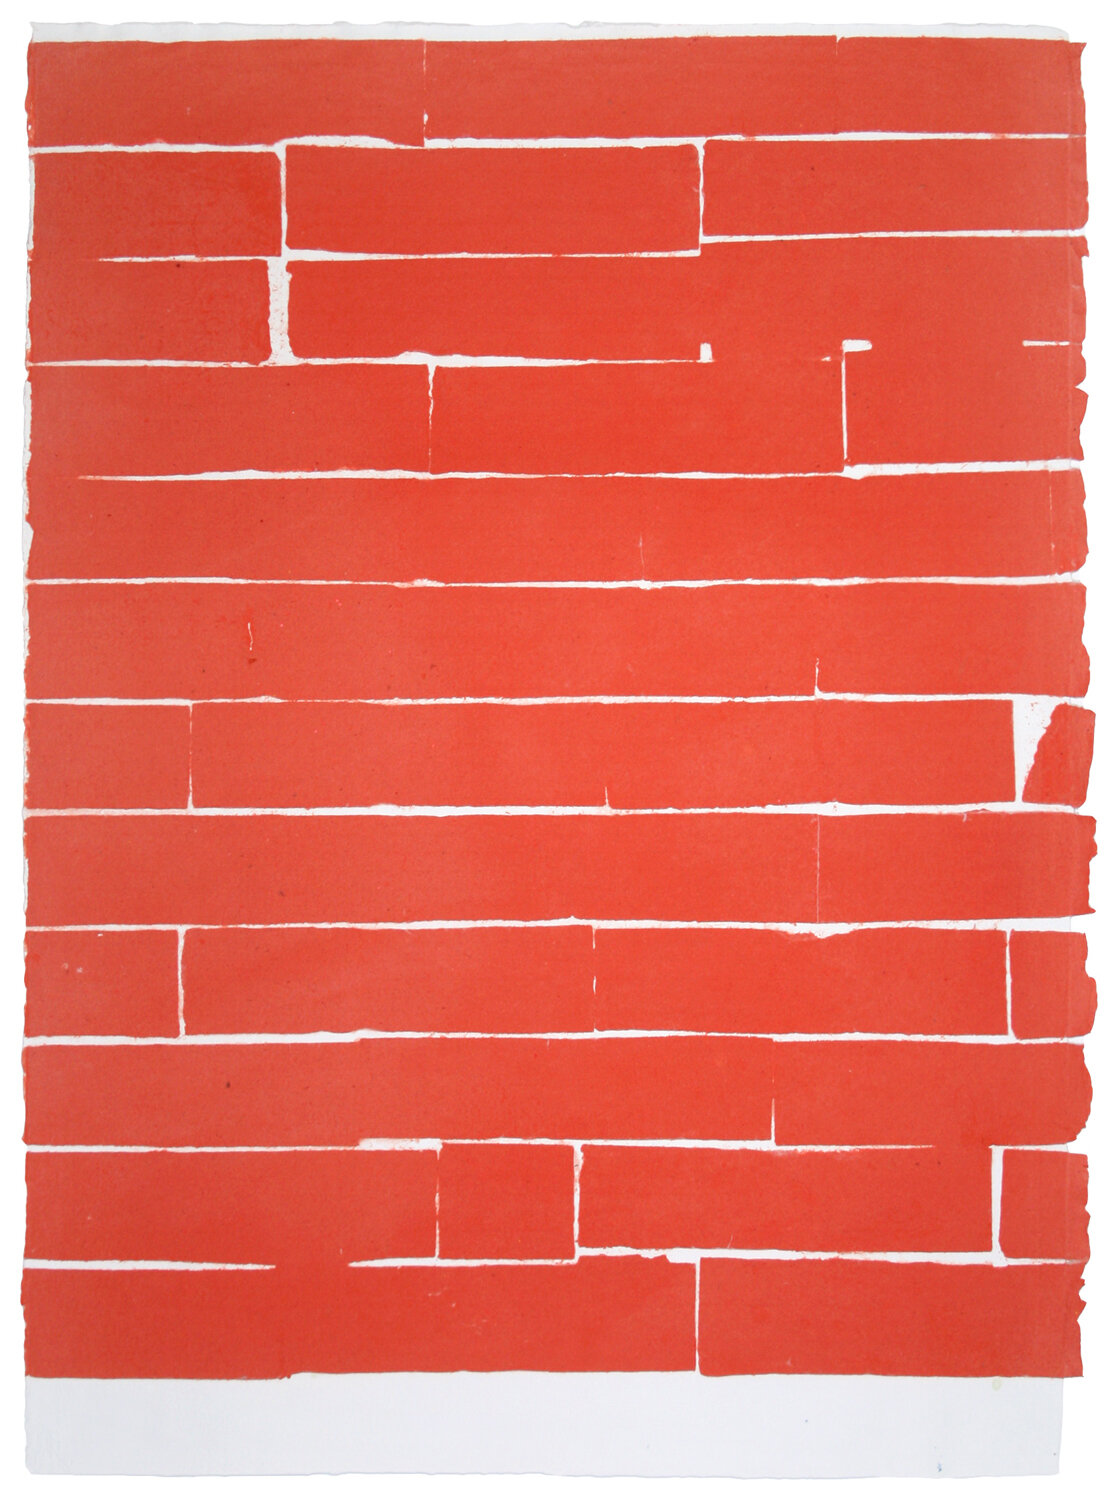  Kate Shepherd,  Untitled,  2005, Pigmented pulp on handmade paper, 29.5 x 22 inches. 